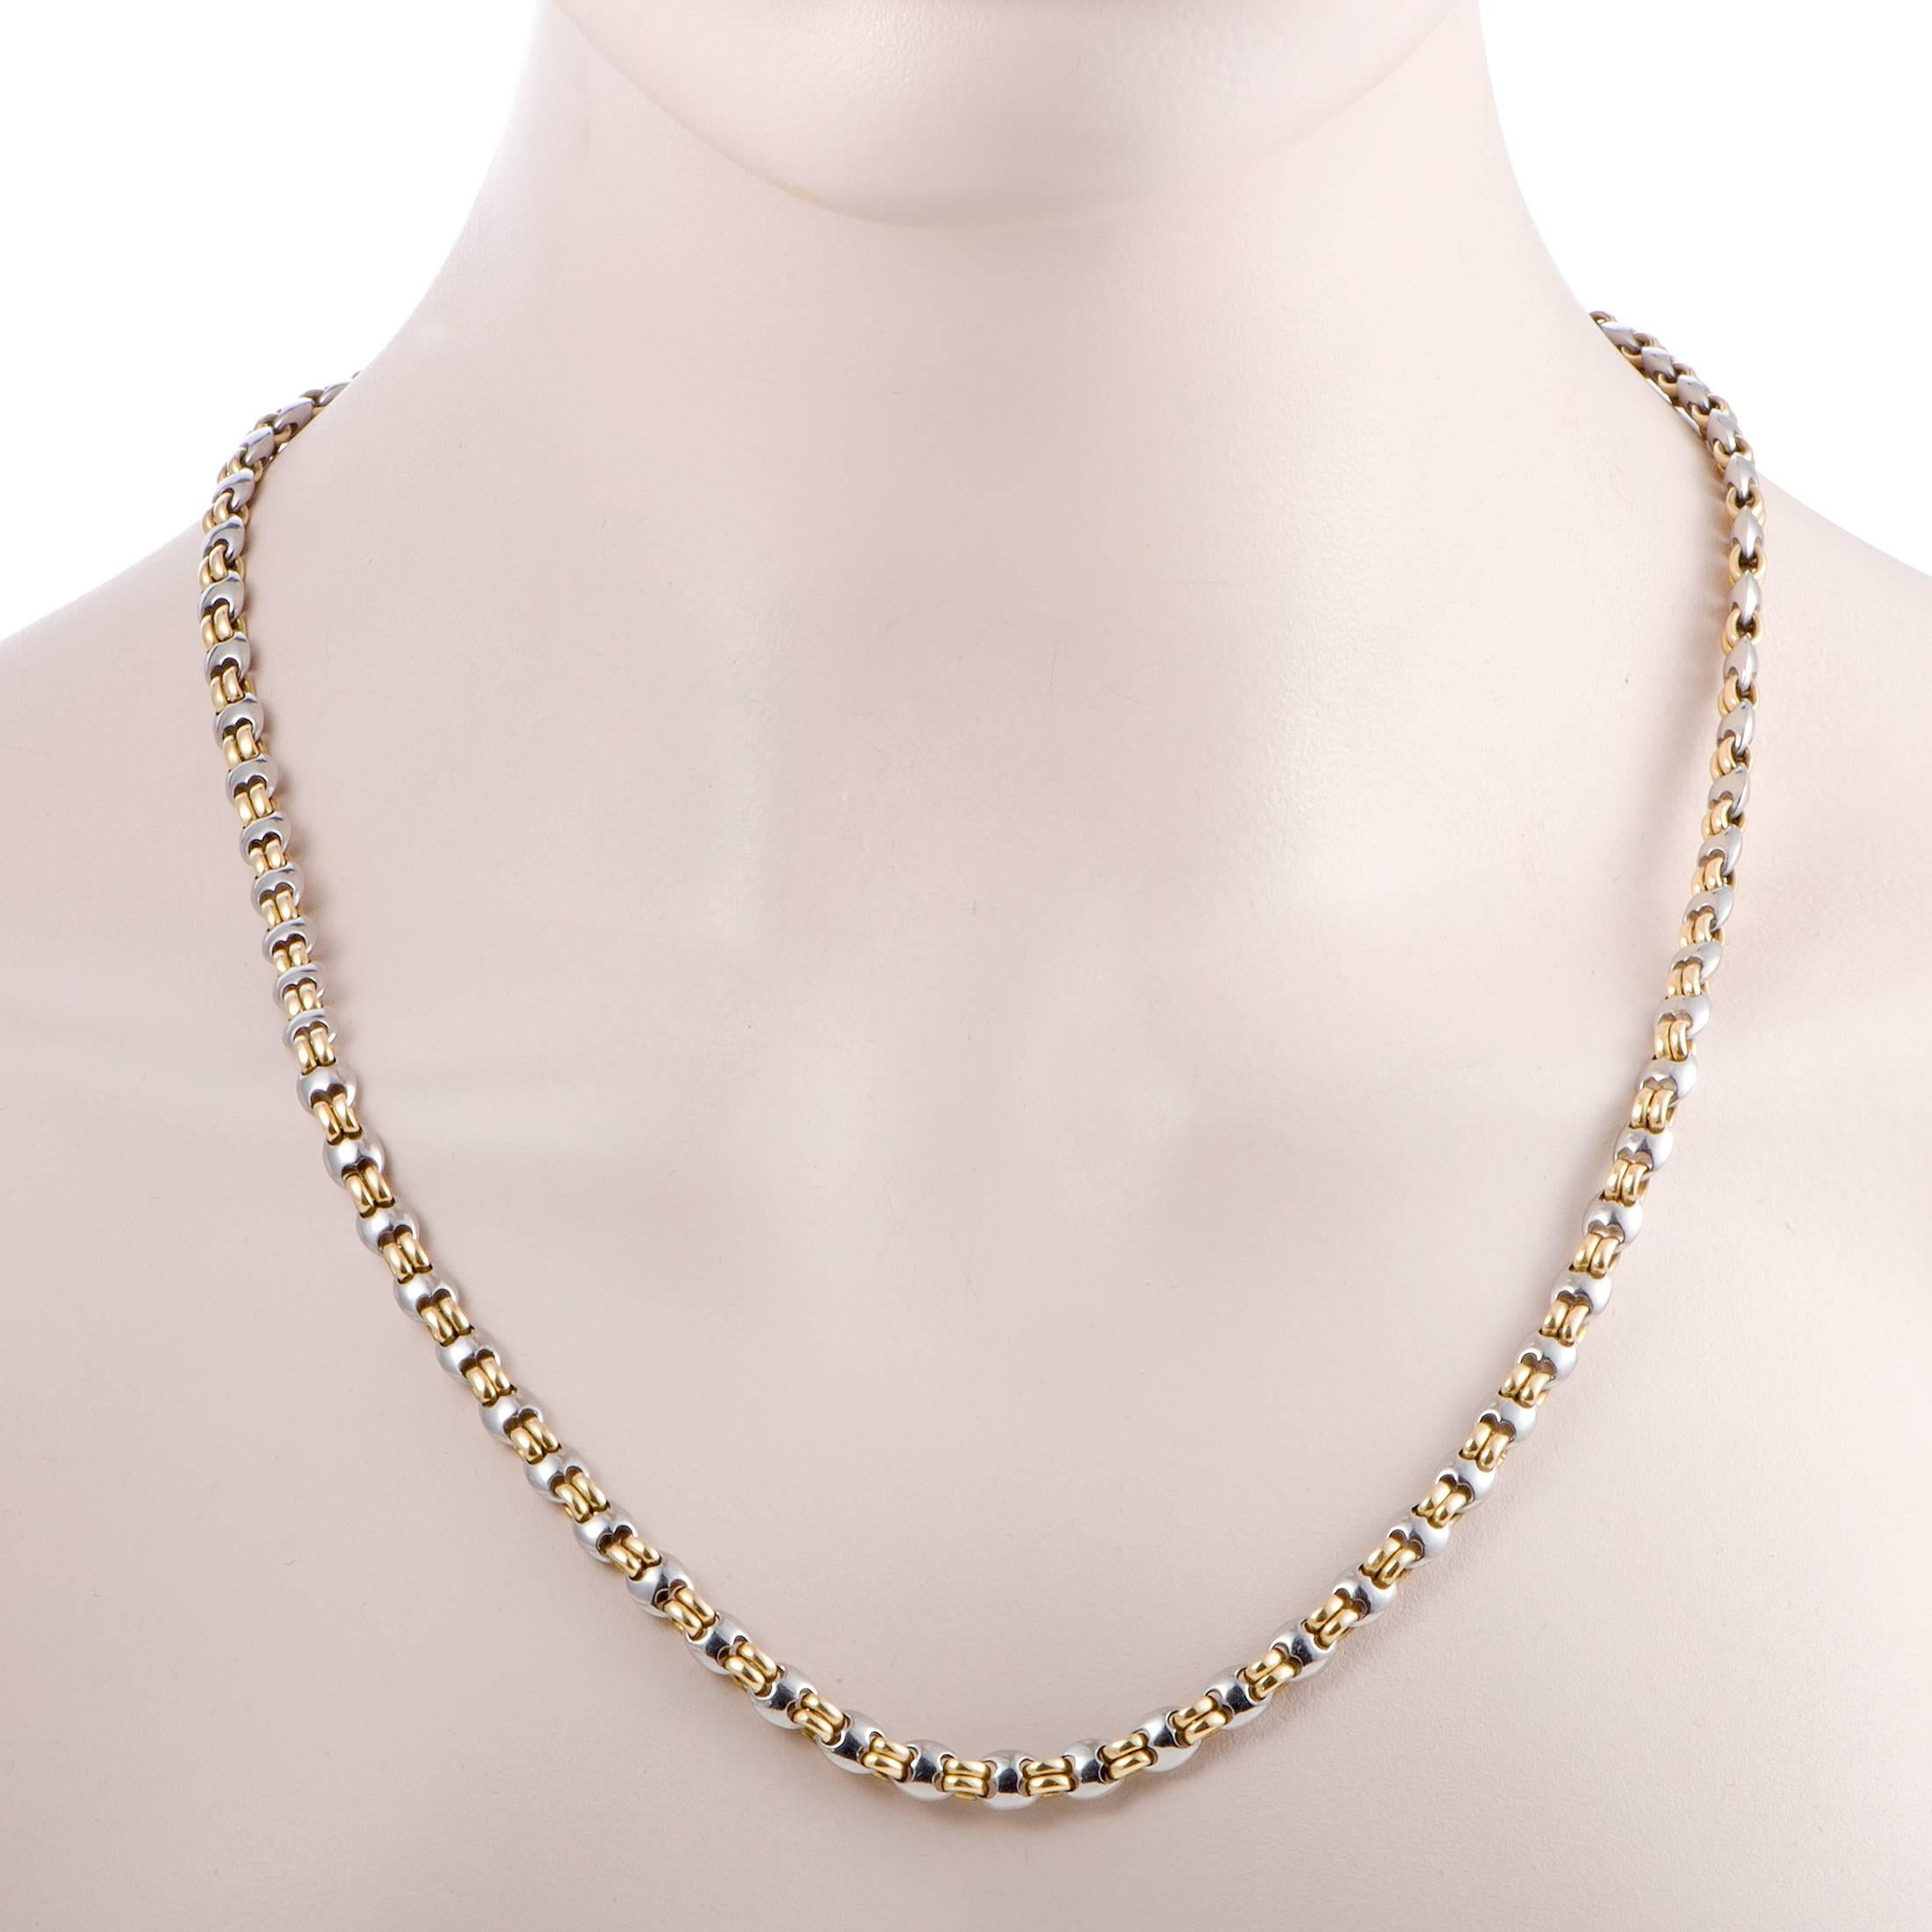 Featuring the renowned Bulgari design, this stunning men’s necklace boasts an incredibly offbeat, masculine appeal. Made of 18K yellow and white gold, the necklace has a length of 22 inches and weighs 62 grams.
Included Items: Manufacturer's Pouch